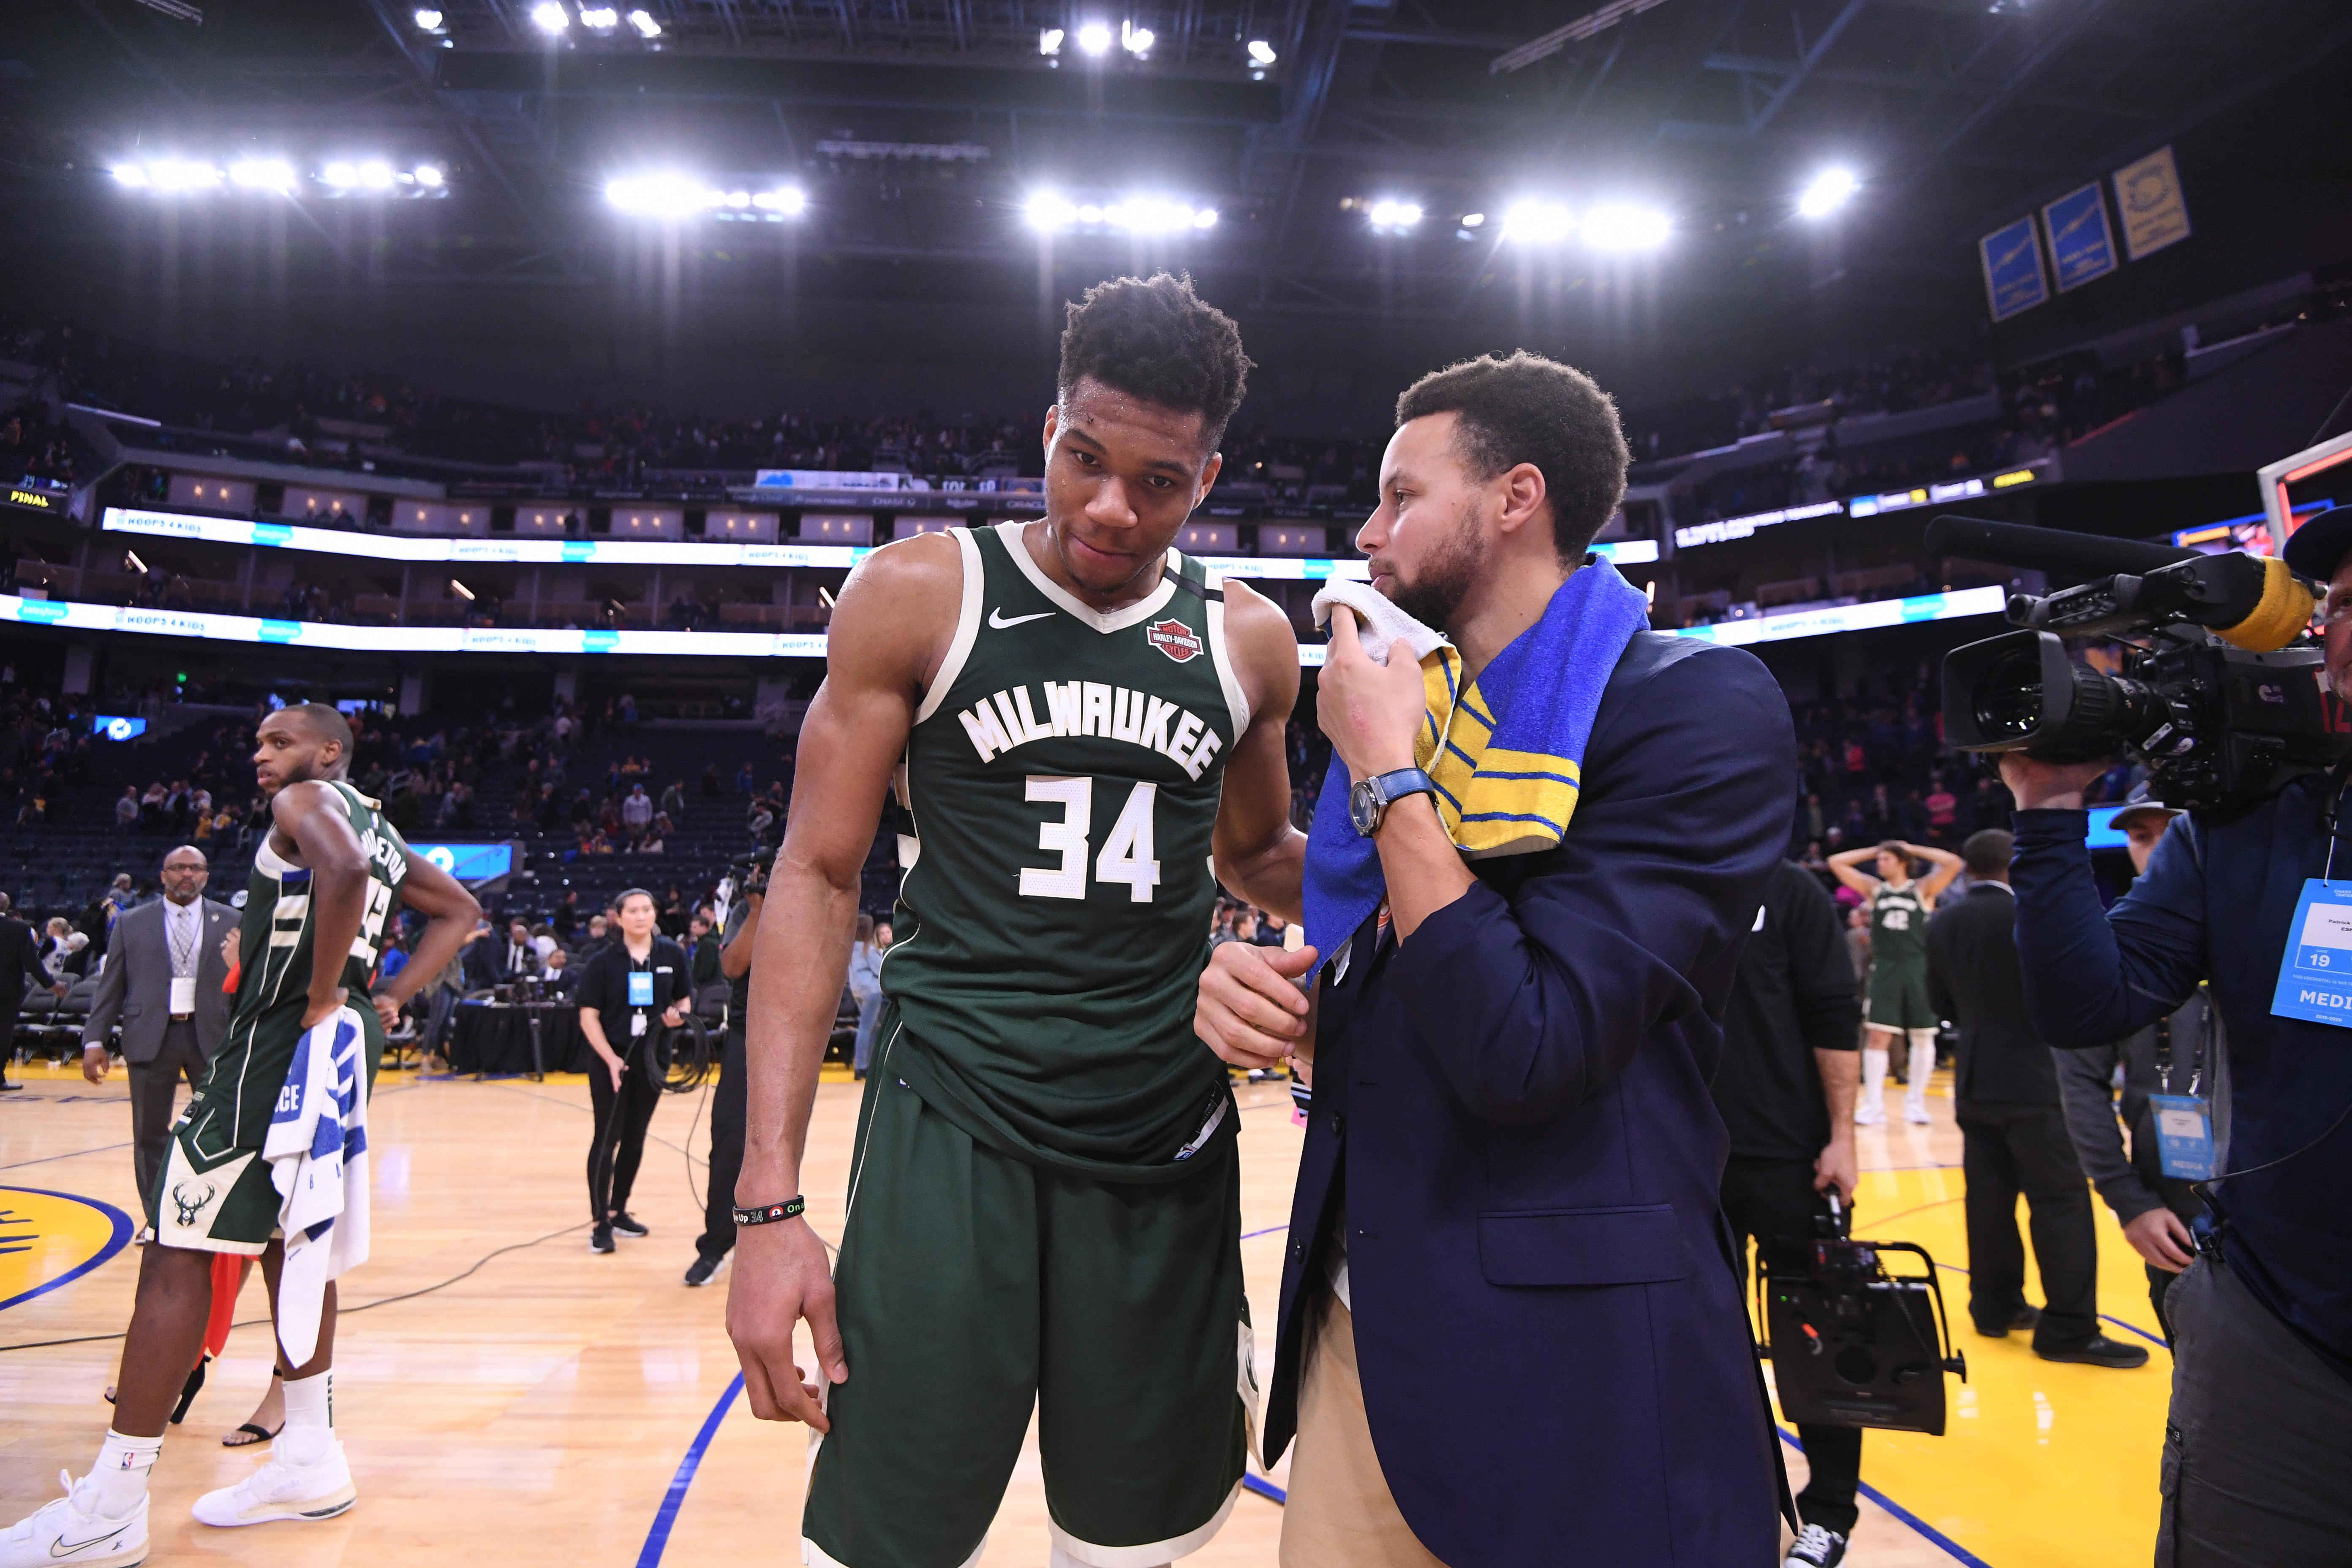 Steph Curry, in street clothes, covers his mouth while talking with Giannis Antetokounmpo after a game